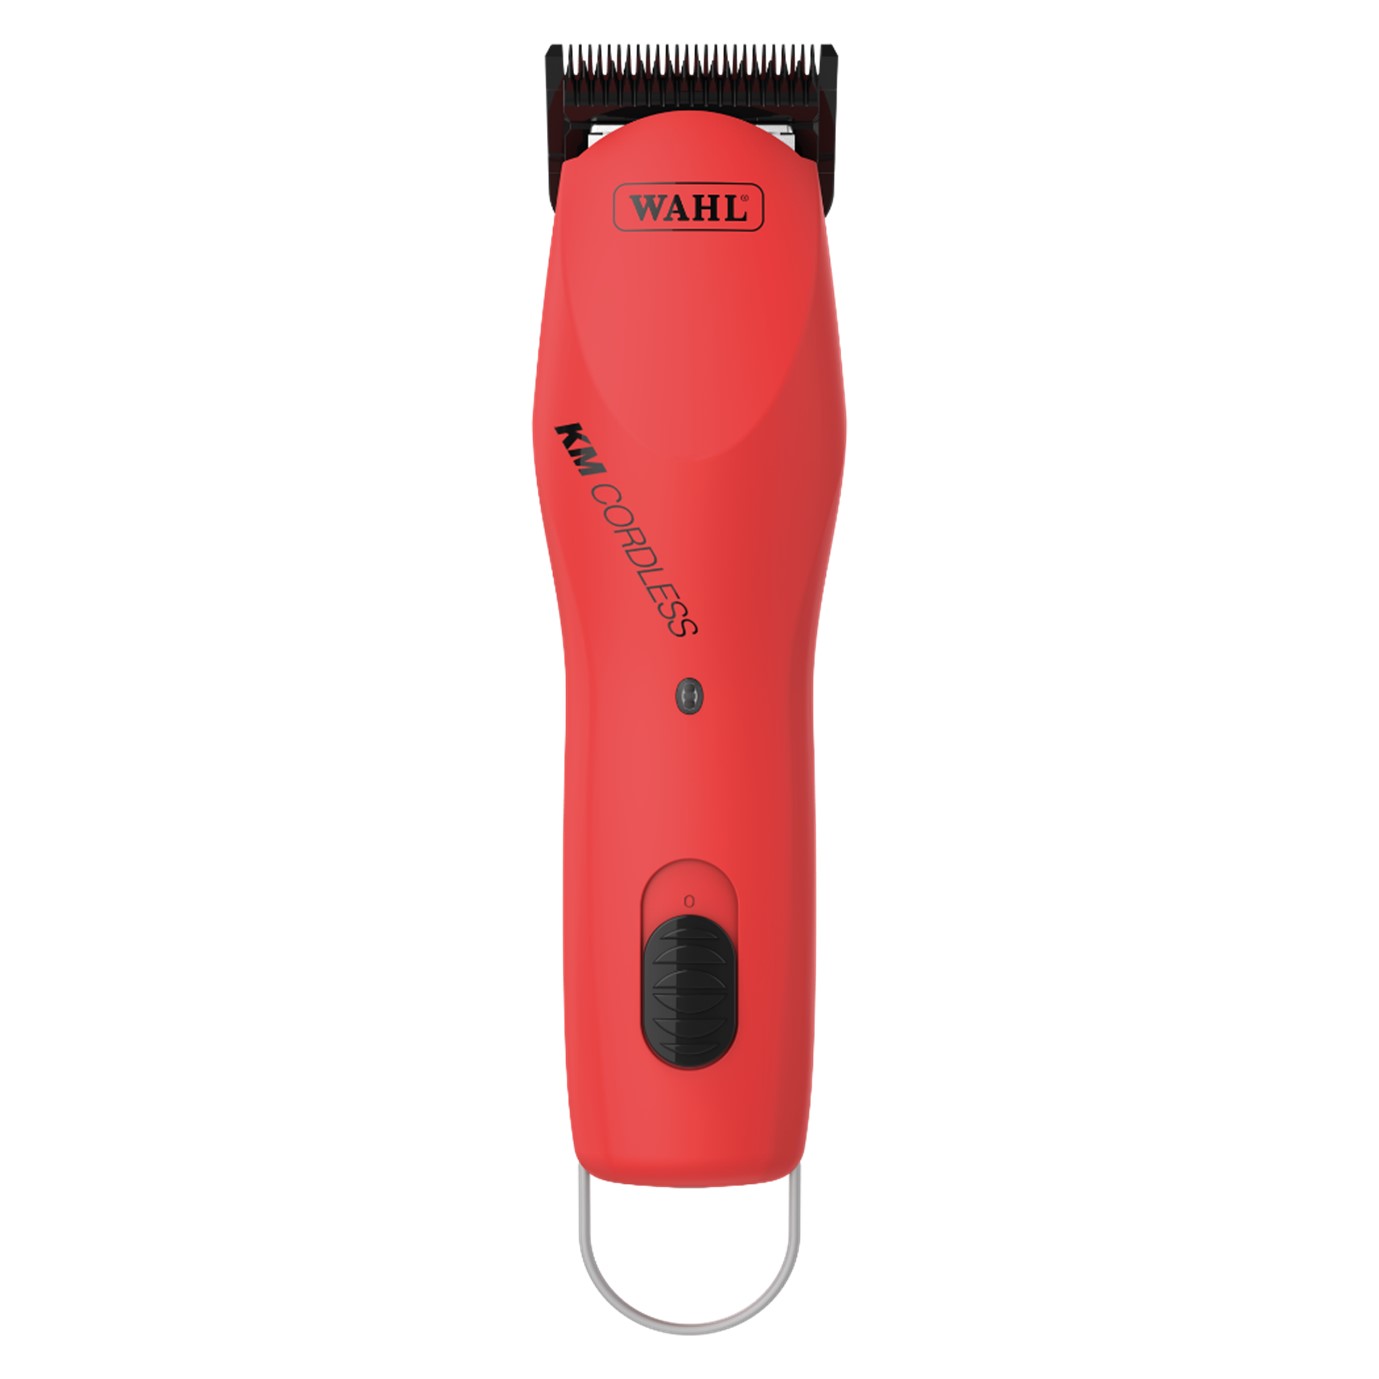 Wahl KM Cordless clipper on sale - save 85